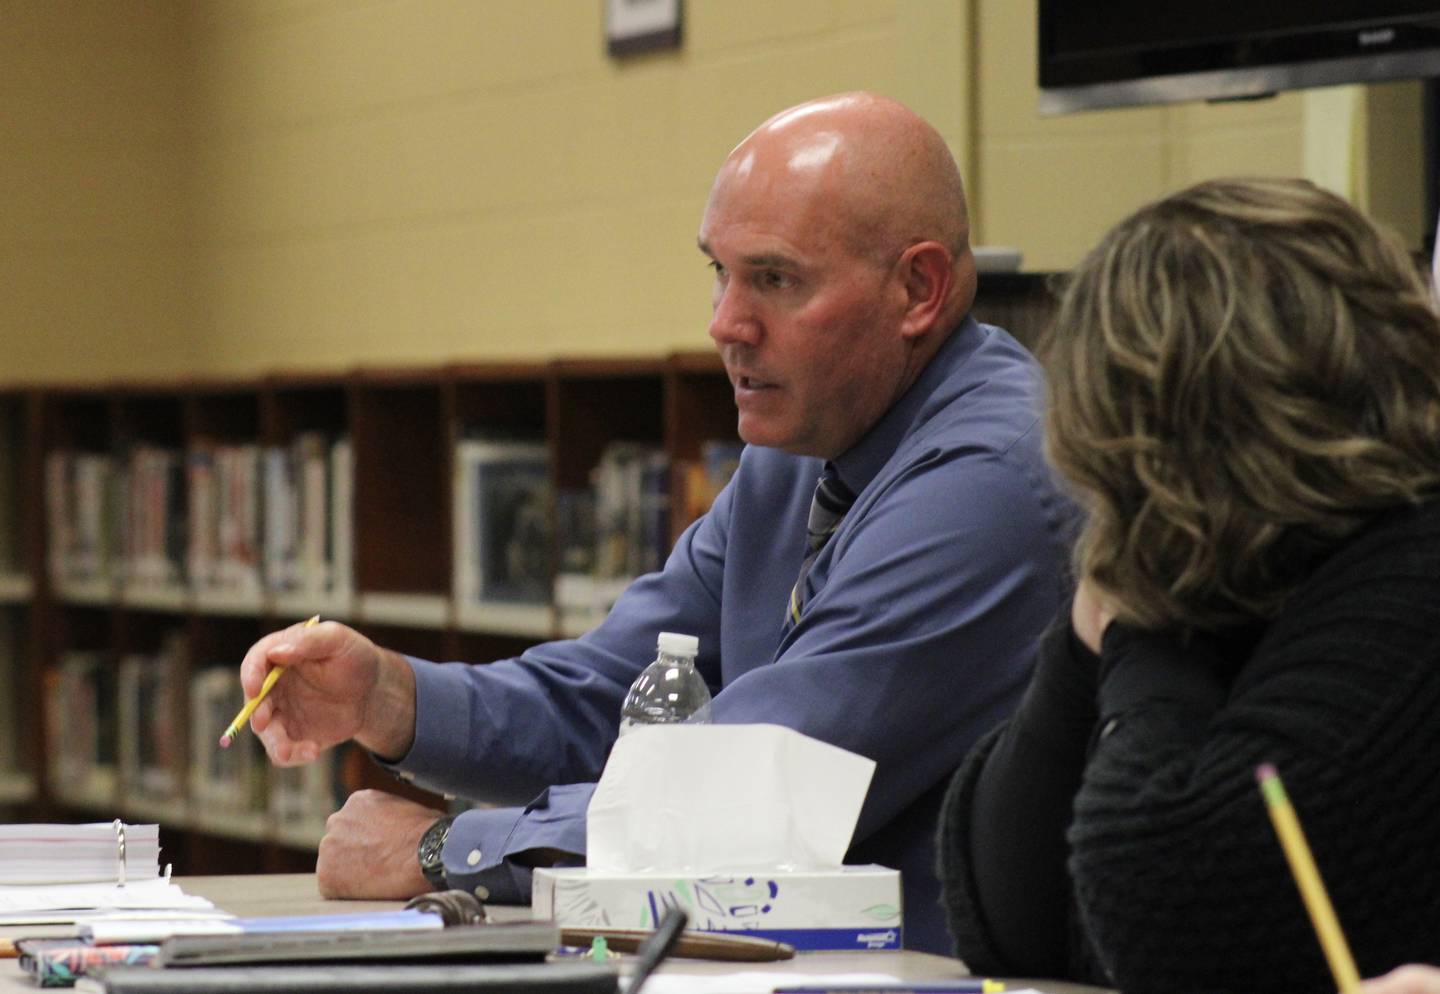 In this March 23, 2022 file photo, Stirling Public Schools Principal Tad Everett participates in a discussion at a Board of Education meeting.  He was interviewed about student safety in the context of active shootings and other emergencies in the aftermath of the shooting in Ovaldi, Texas.